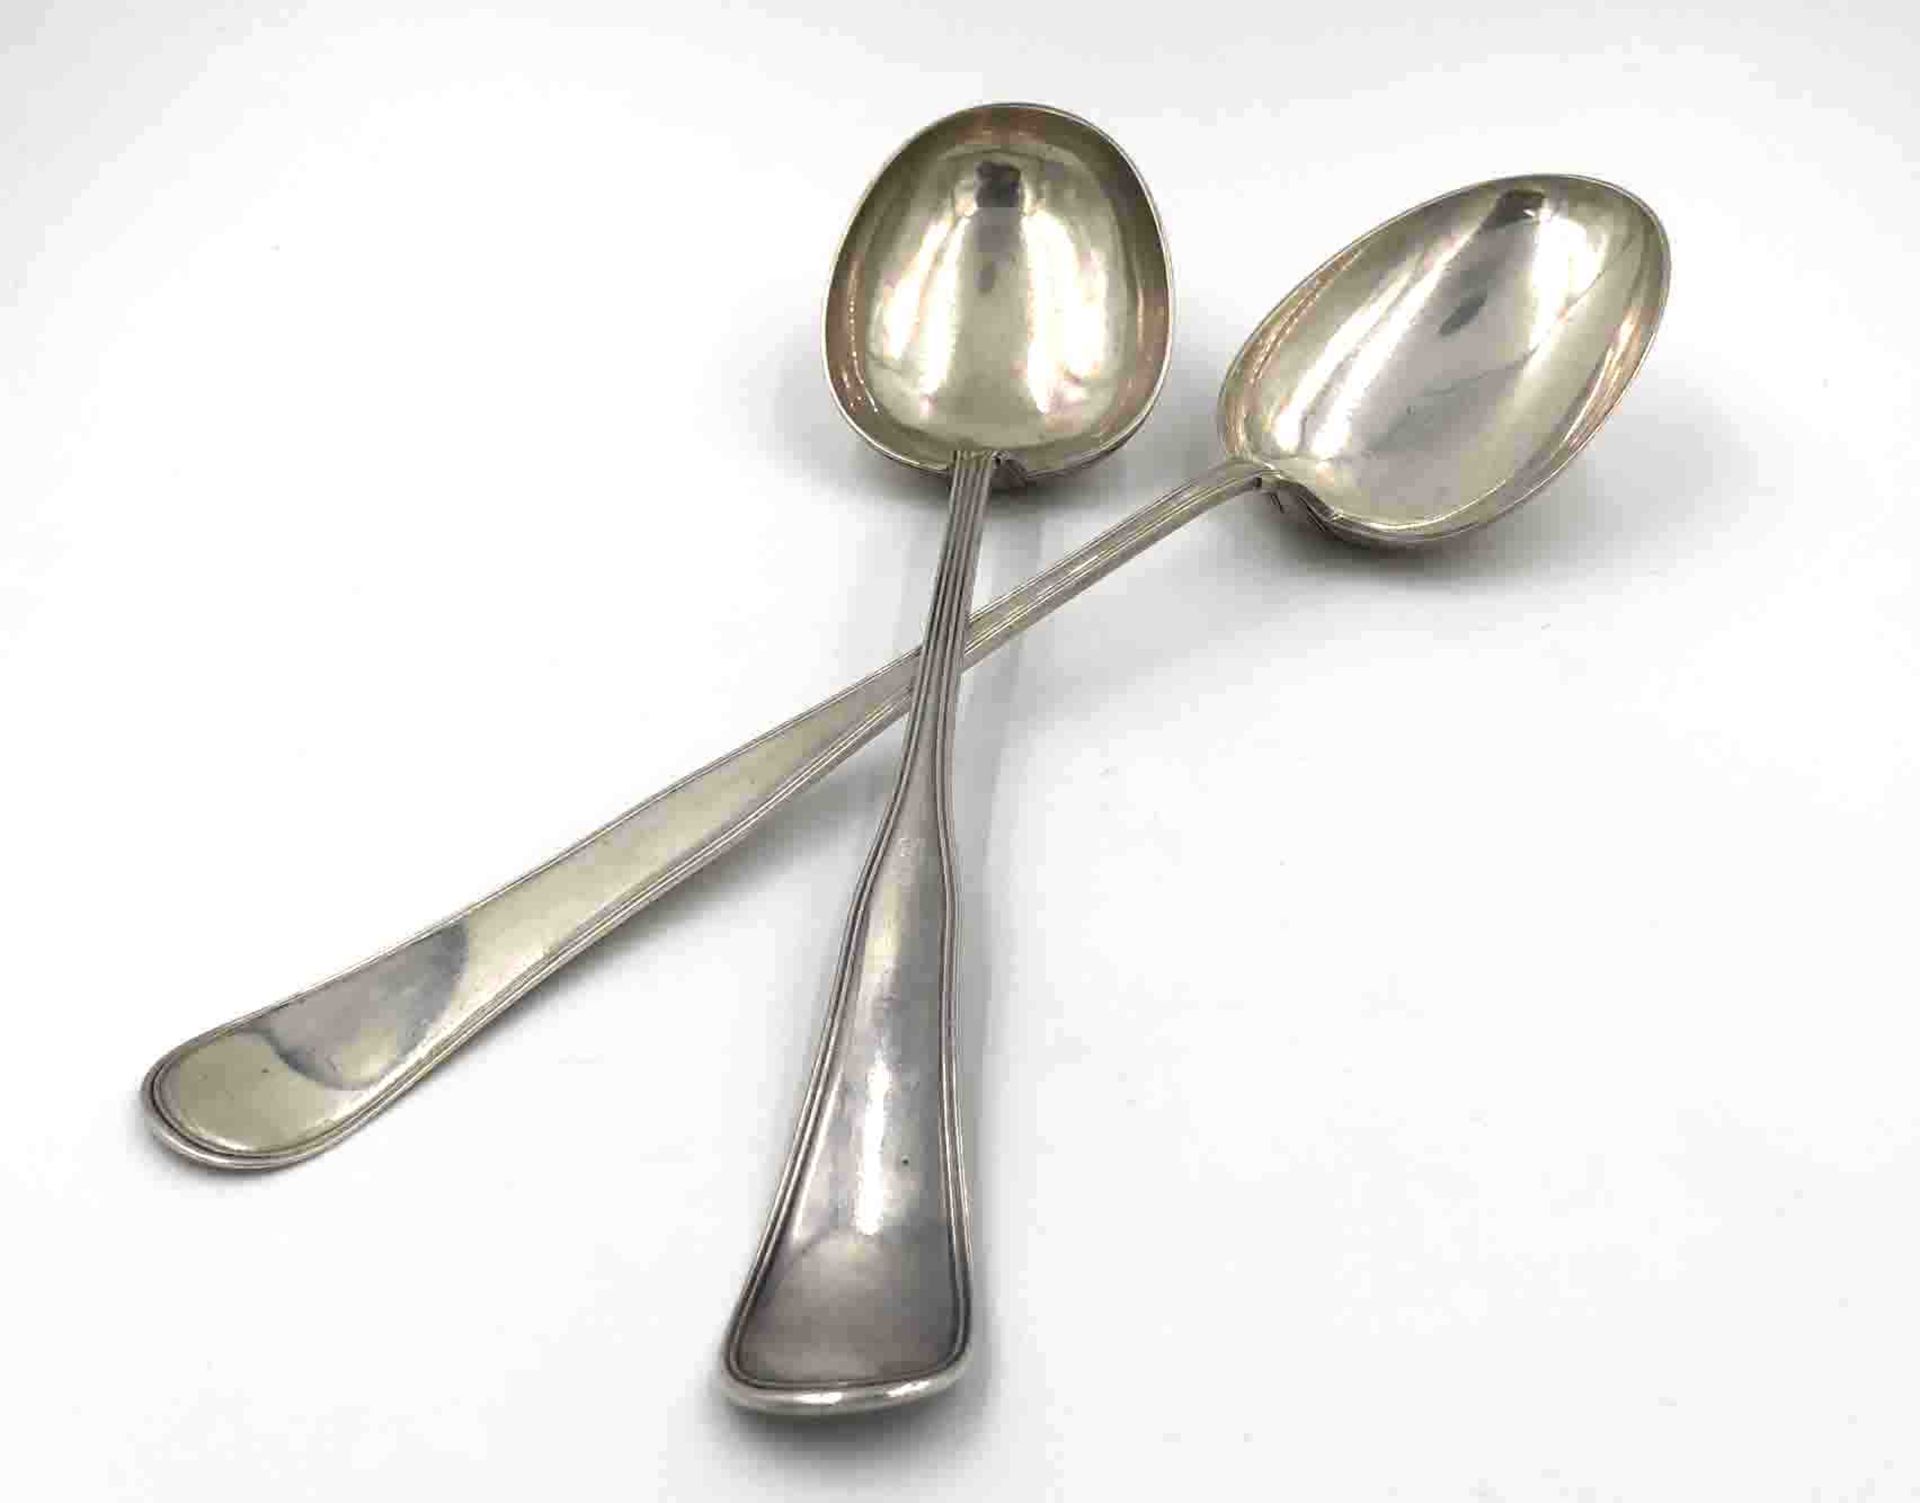 2 large silver spoons, Copenhagen. '' CLEMENT ''.450 grams. Up to 42 cm long. Each with three turret